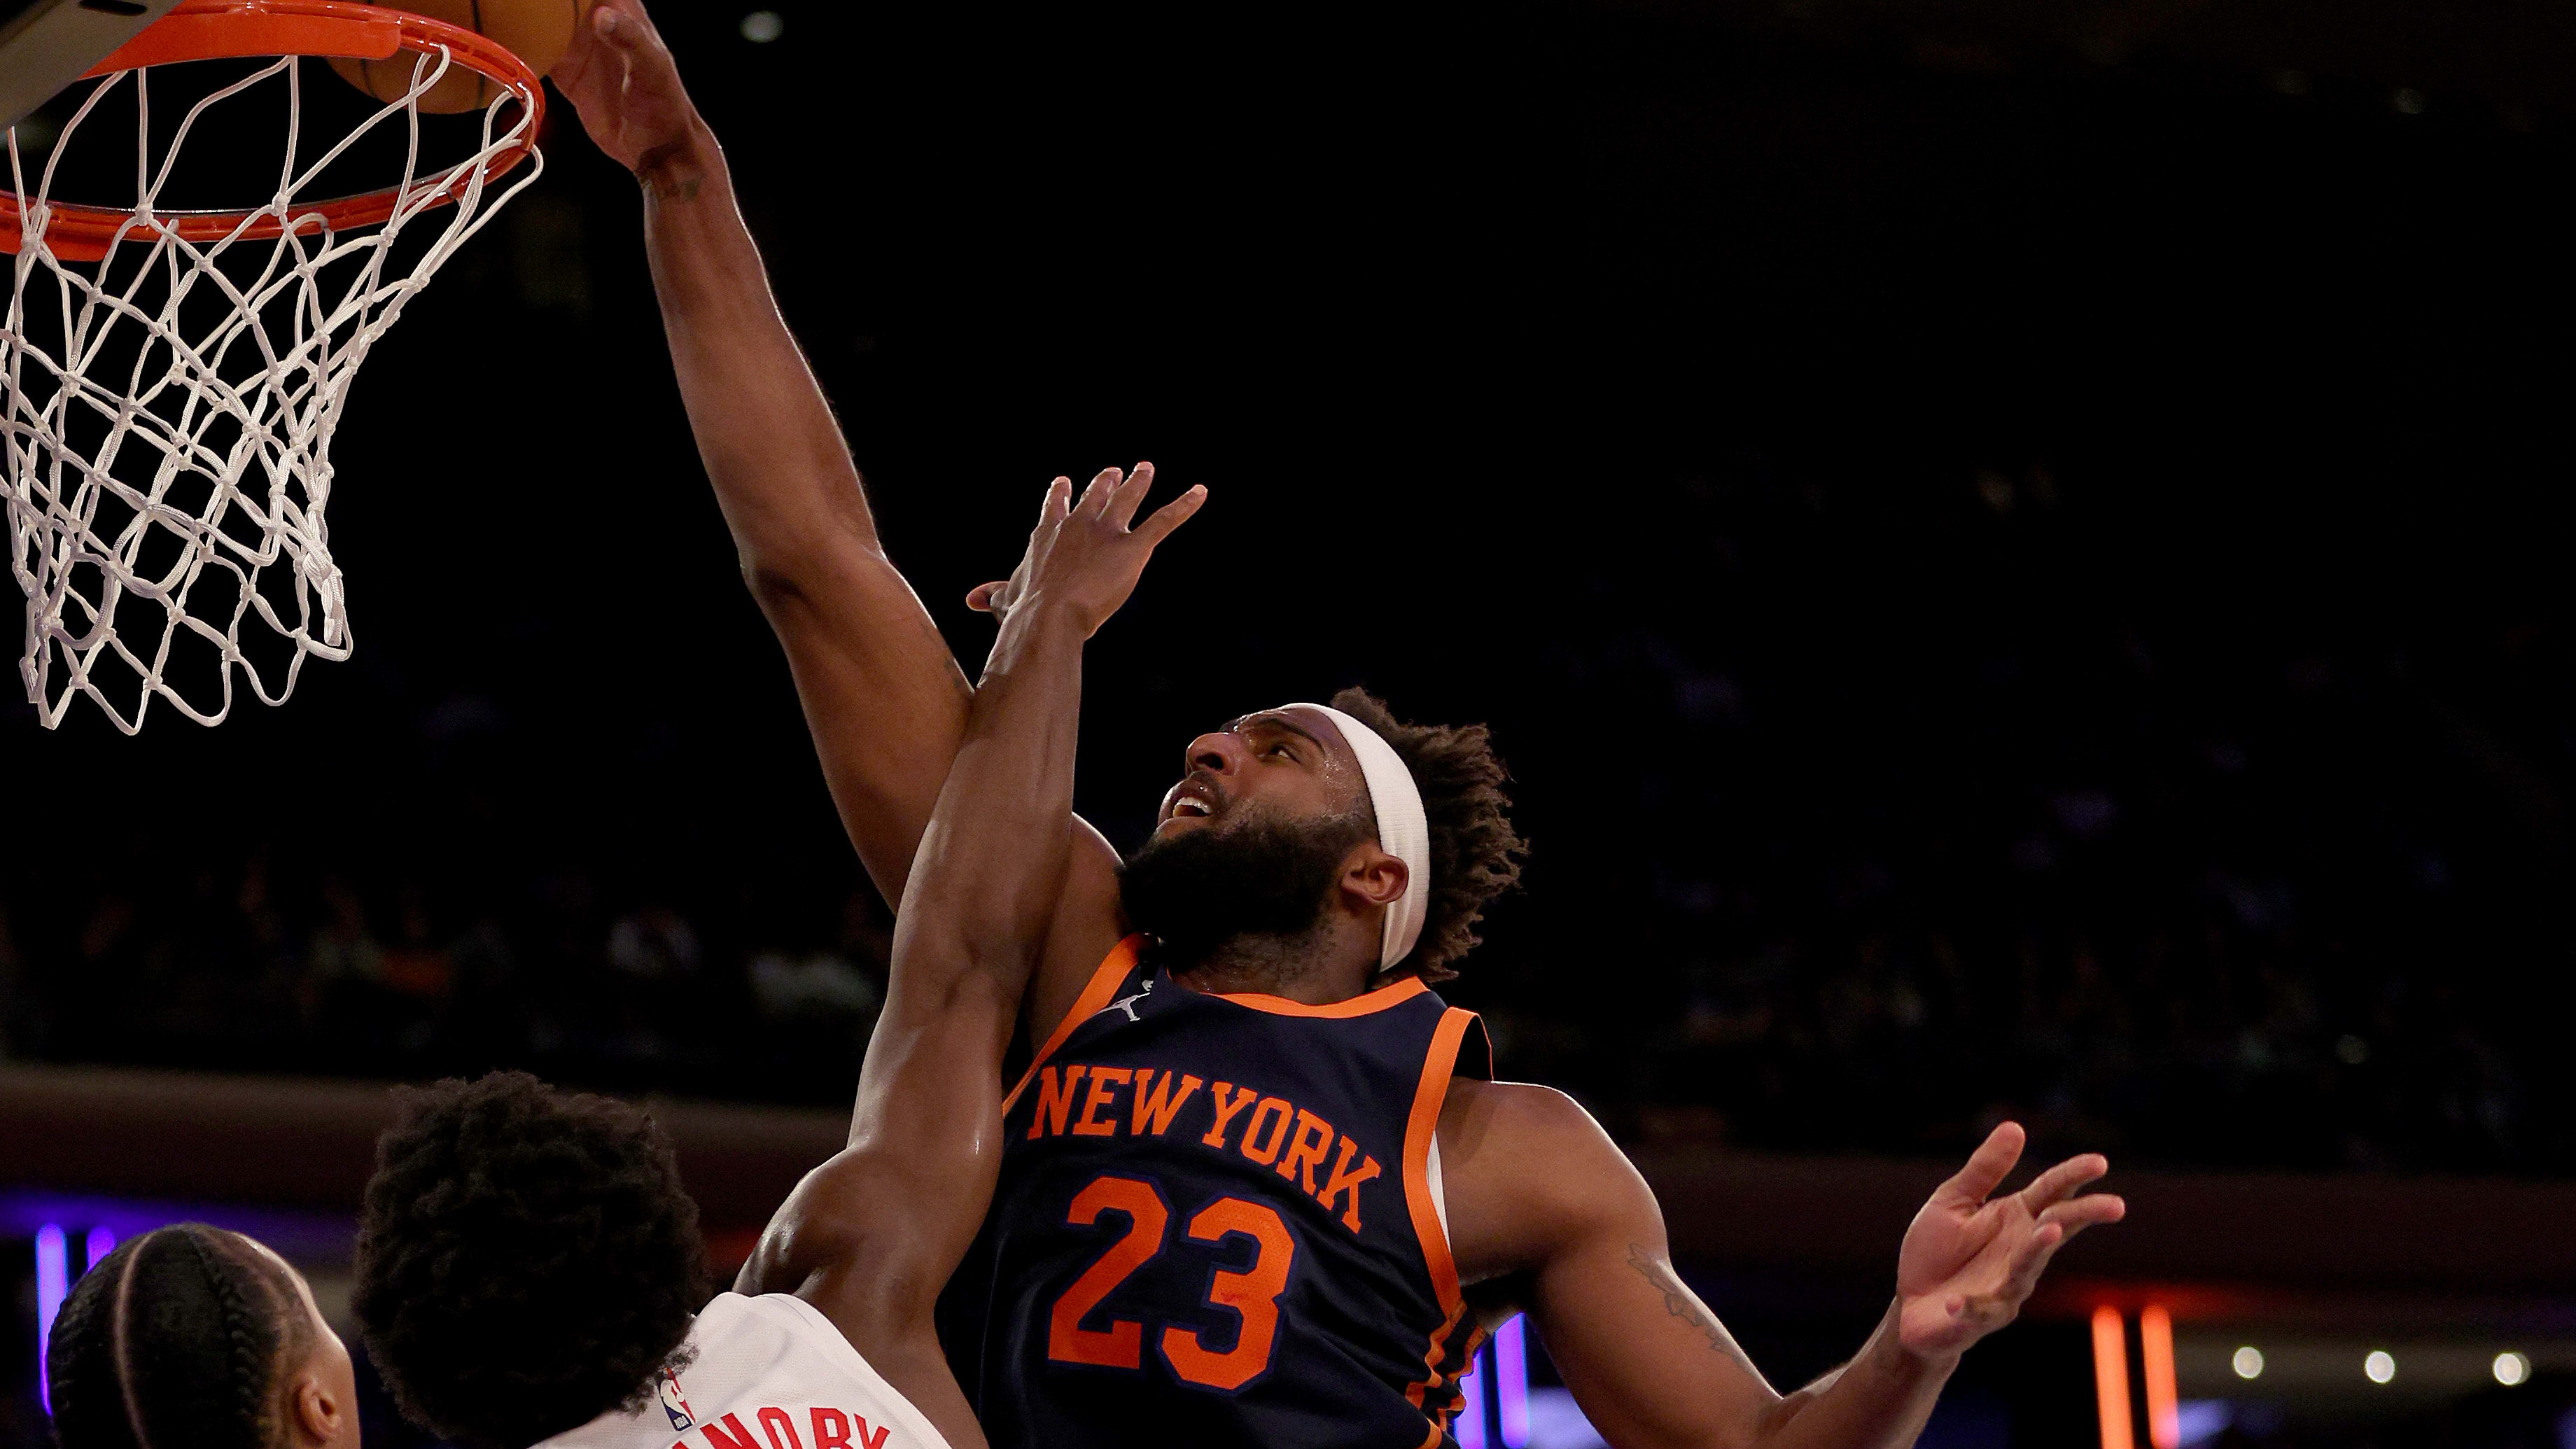 NBA Playoffs: The Knicks Are Much More Fun Without Stars